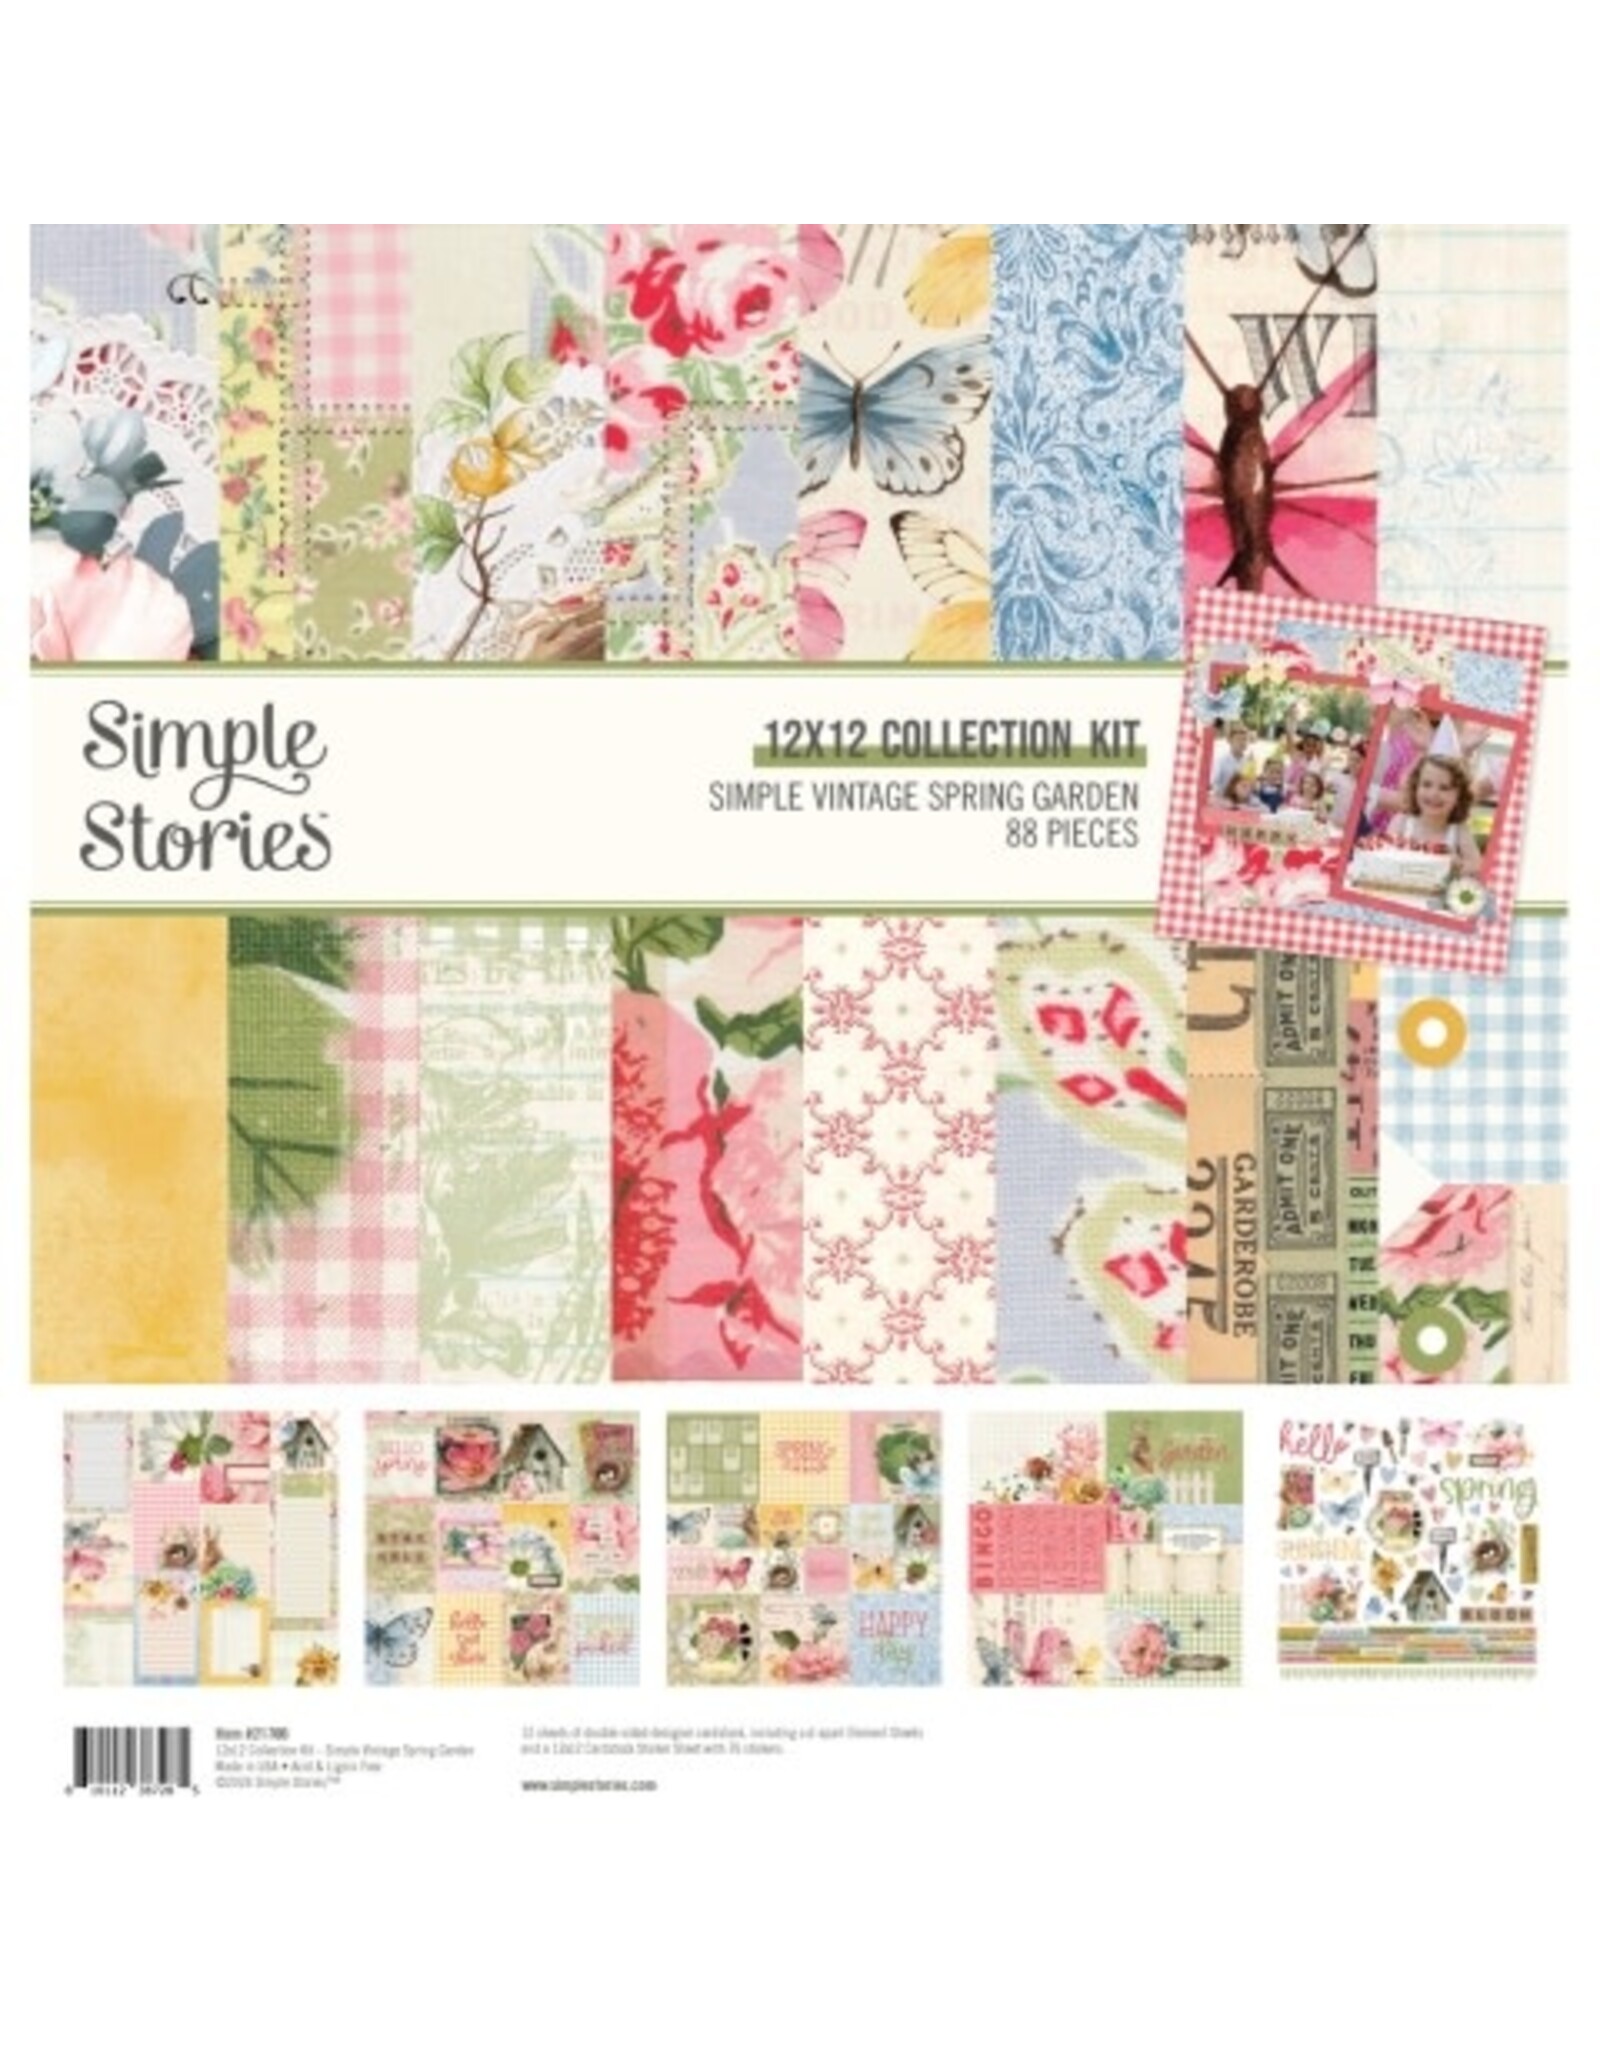 Simple Stories Simple Vintage Spring Garden - Collection Kit